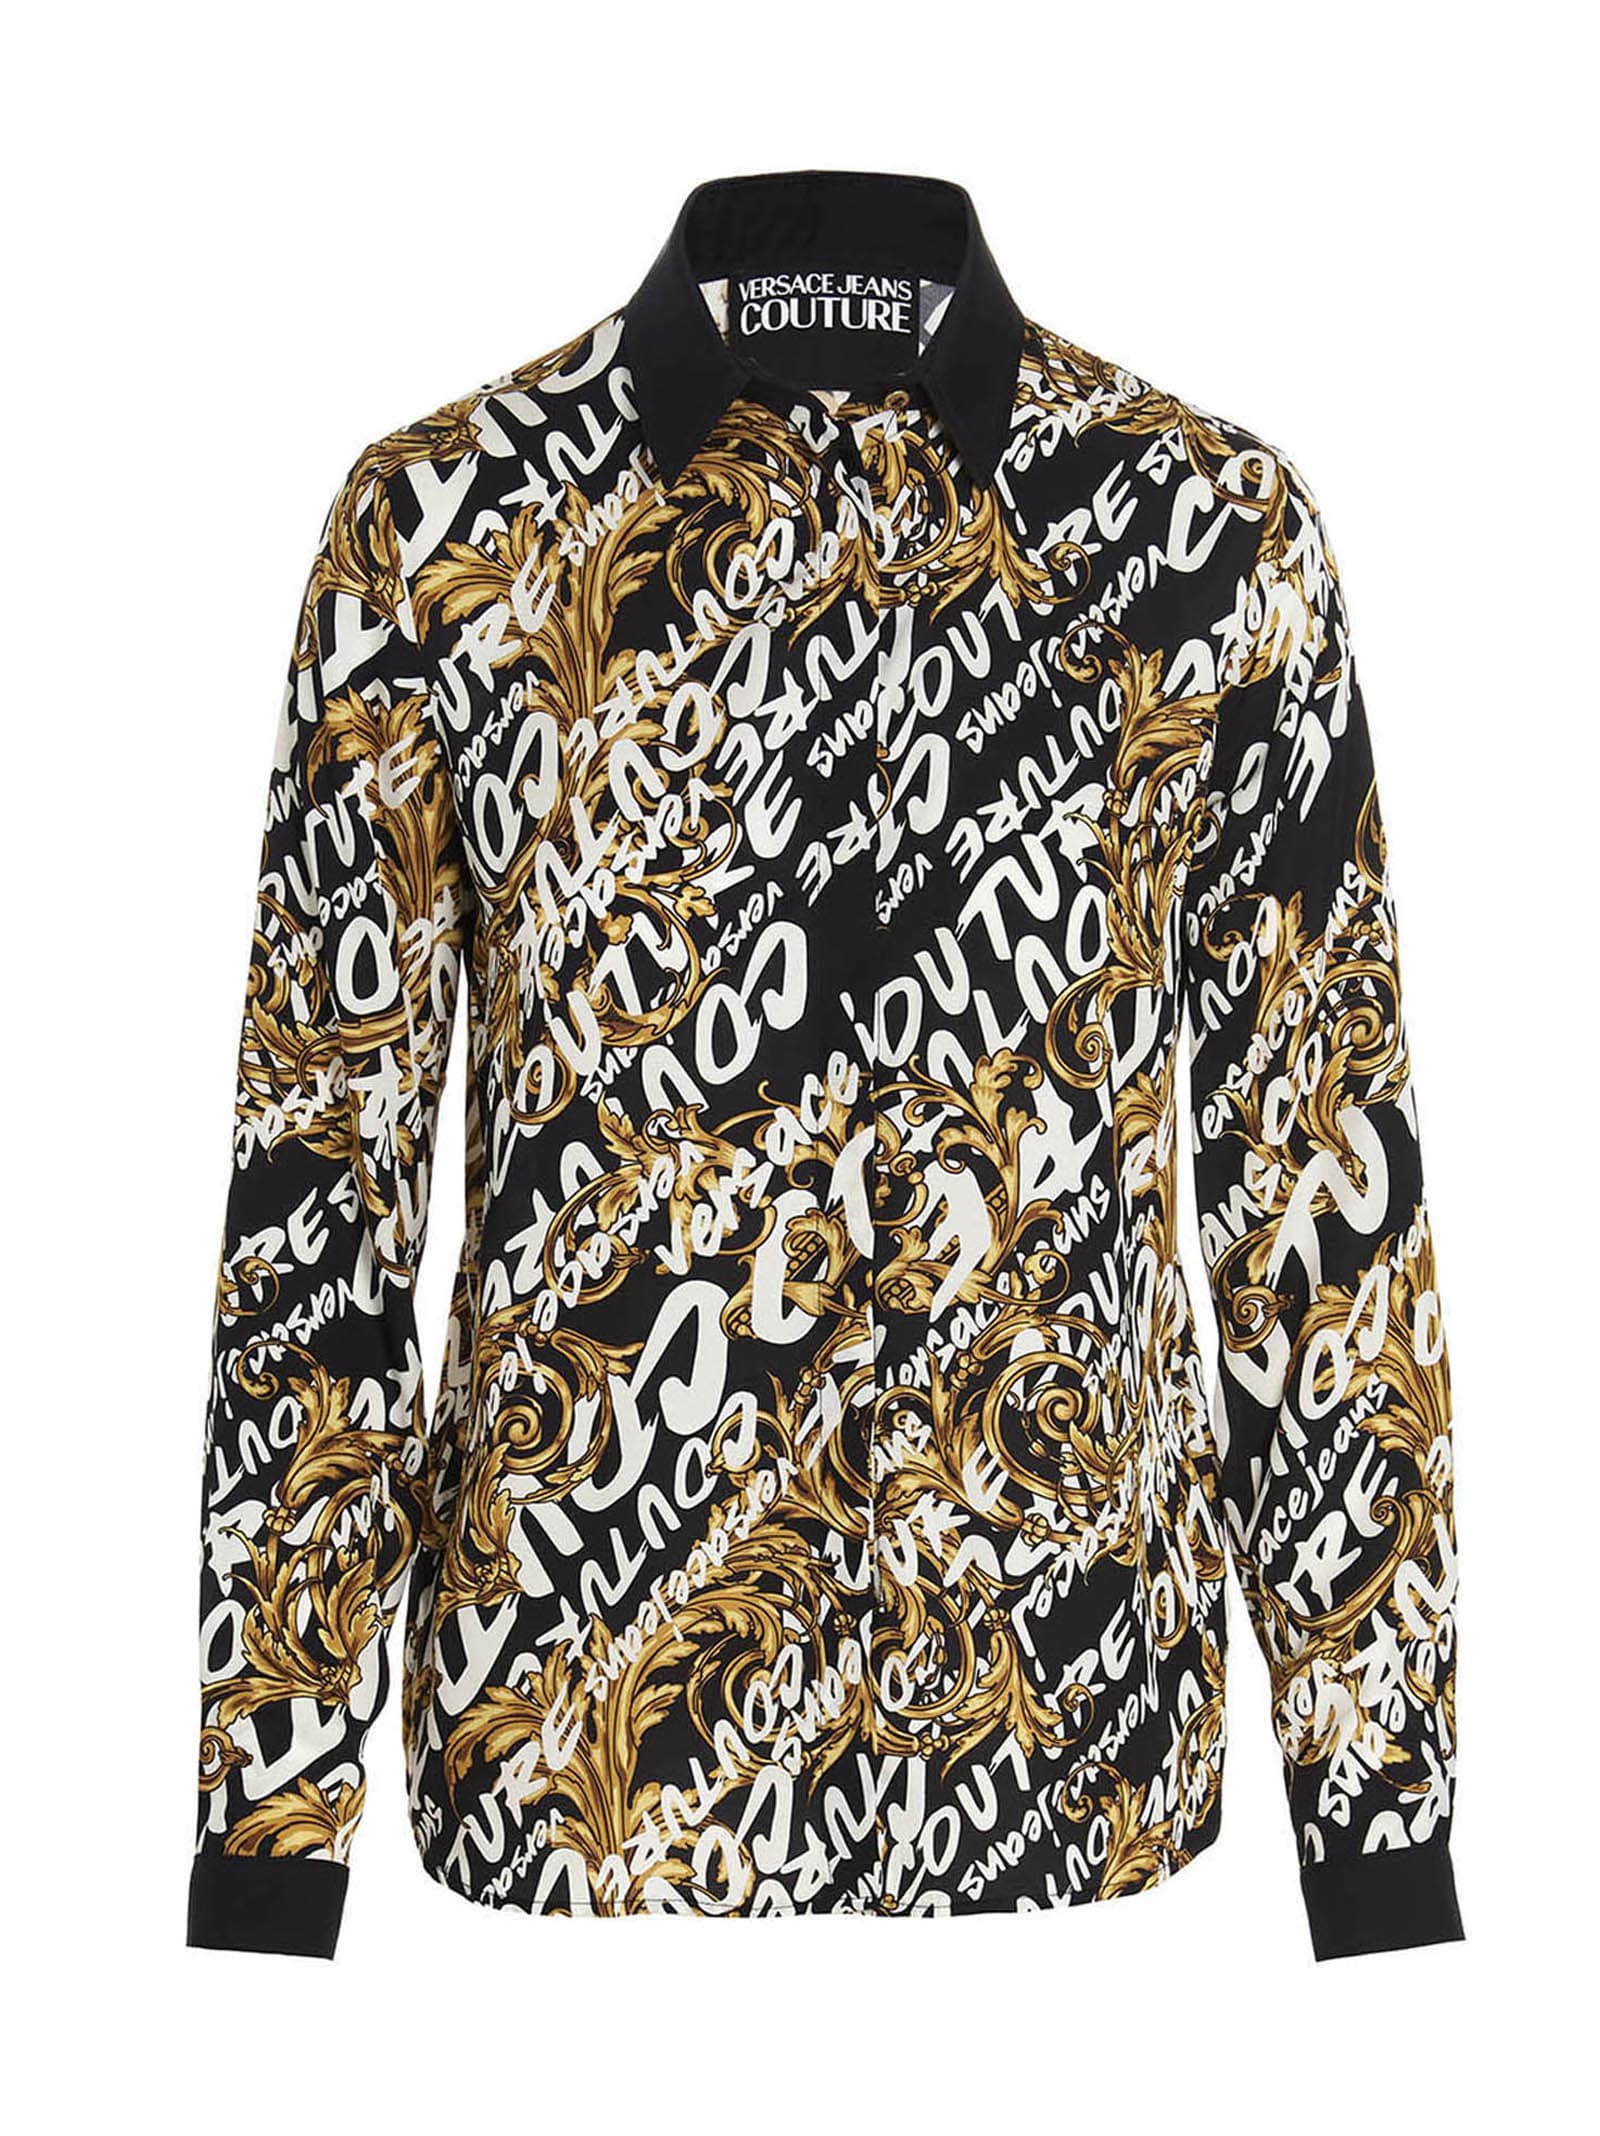 Versace Jeans Couture barocco Logo Print Shirt